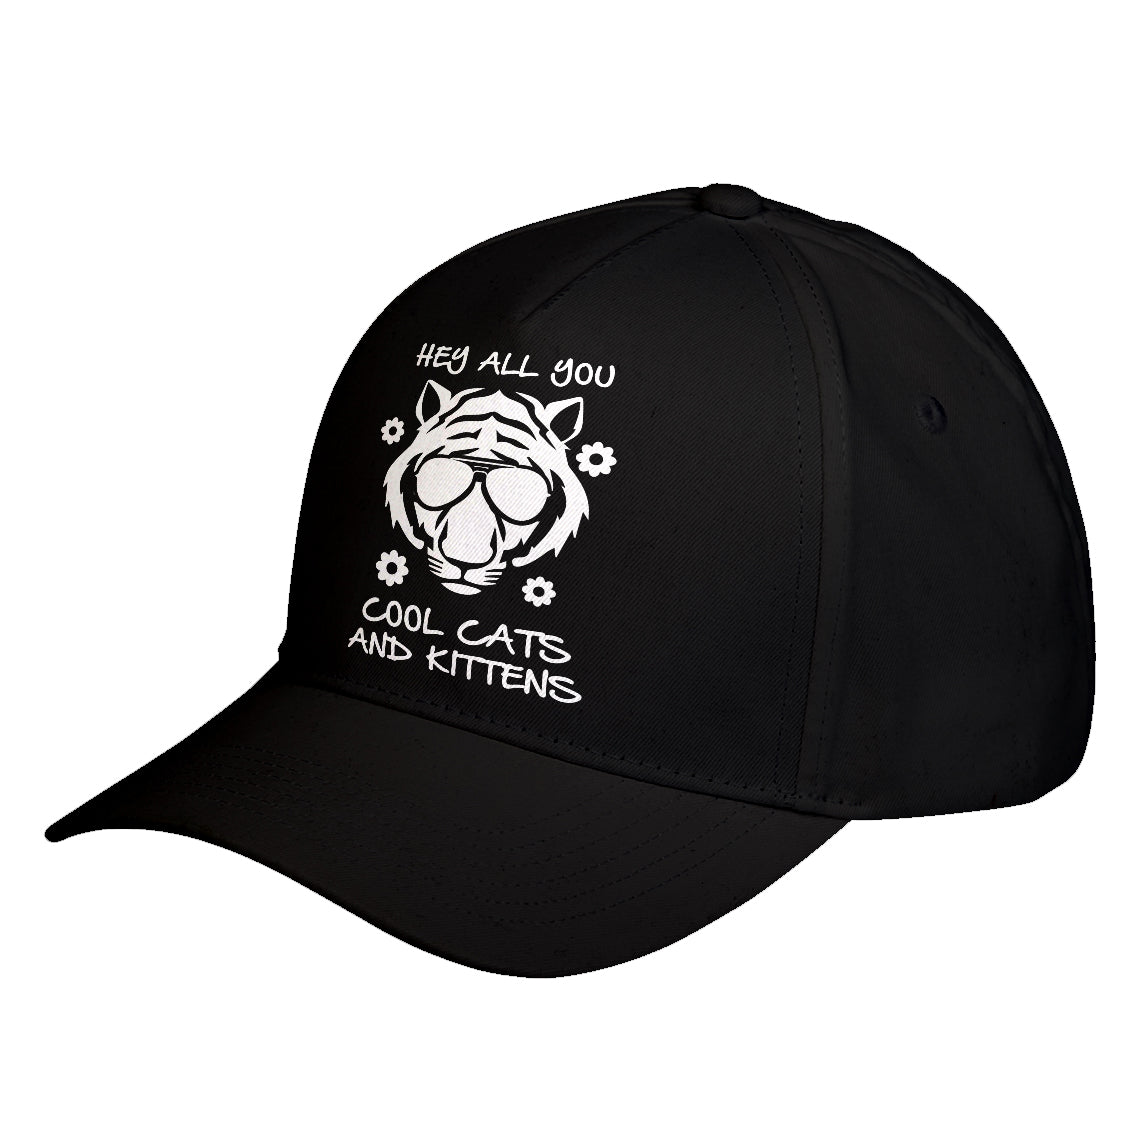 Hat Hey all you Cool Cats and Kittens Baseball Cap